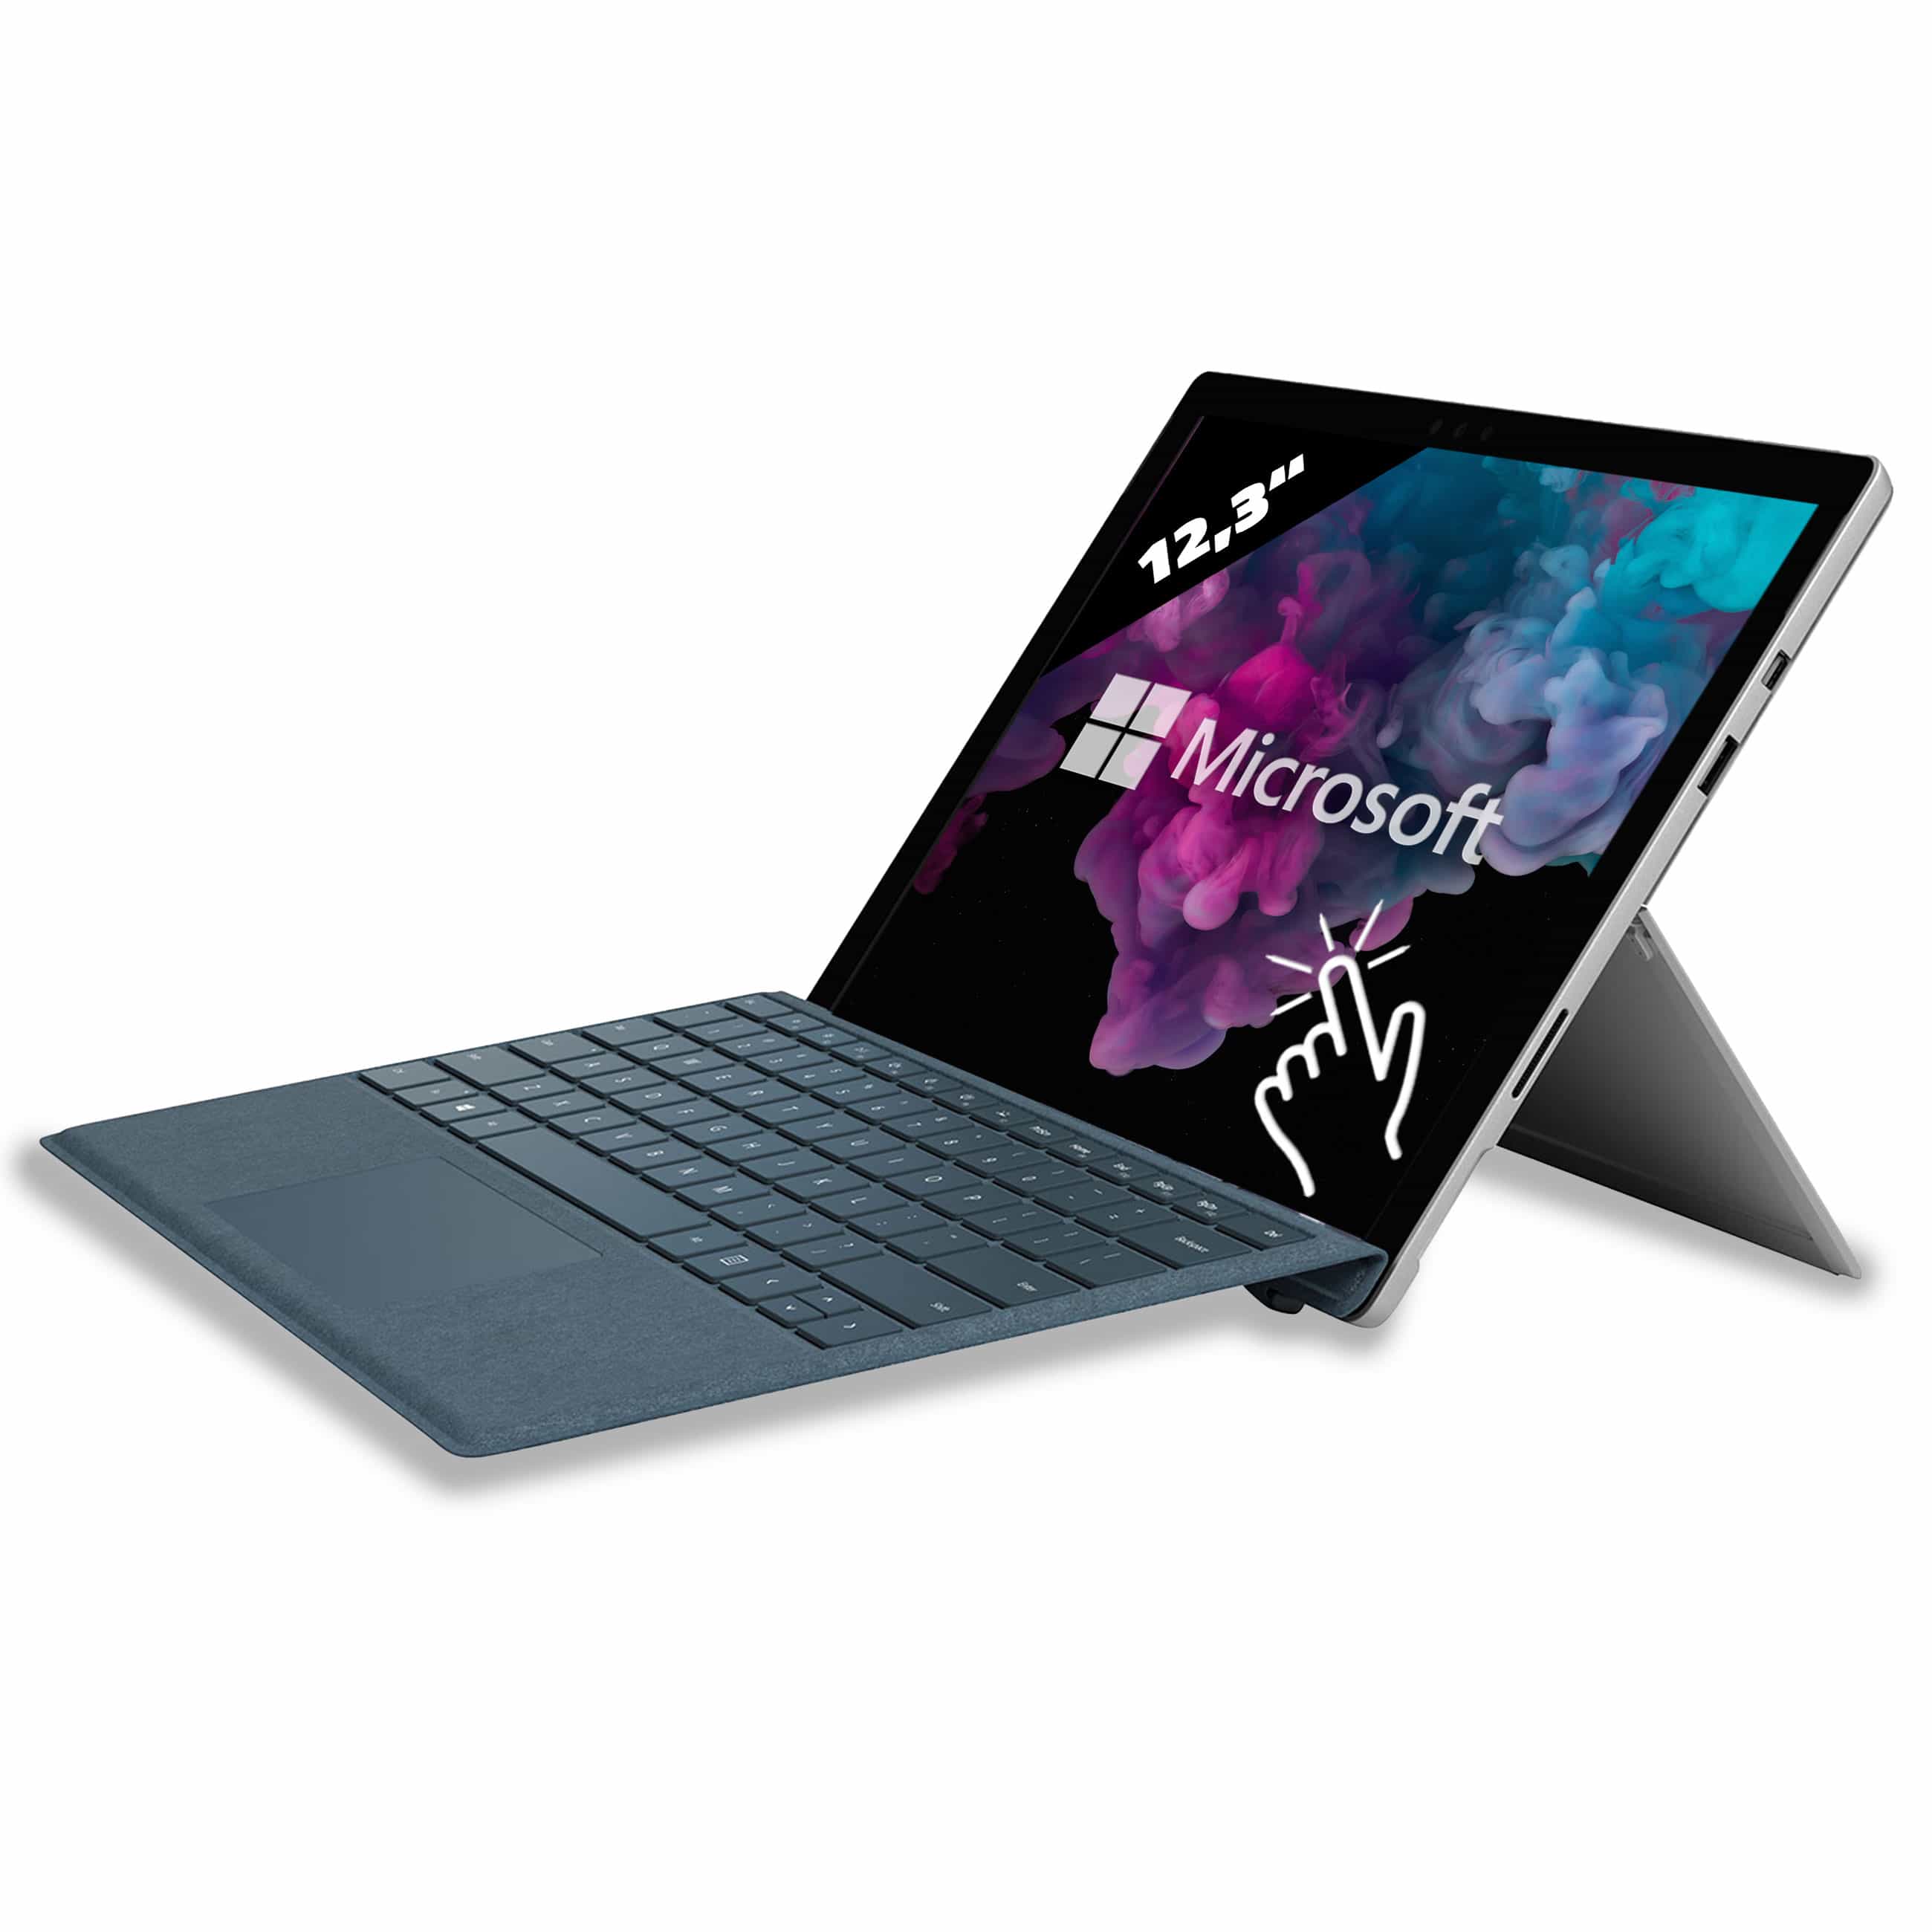 Microsoft Surface Pro 5Sehr gut - AfB-refurbished